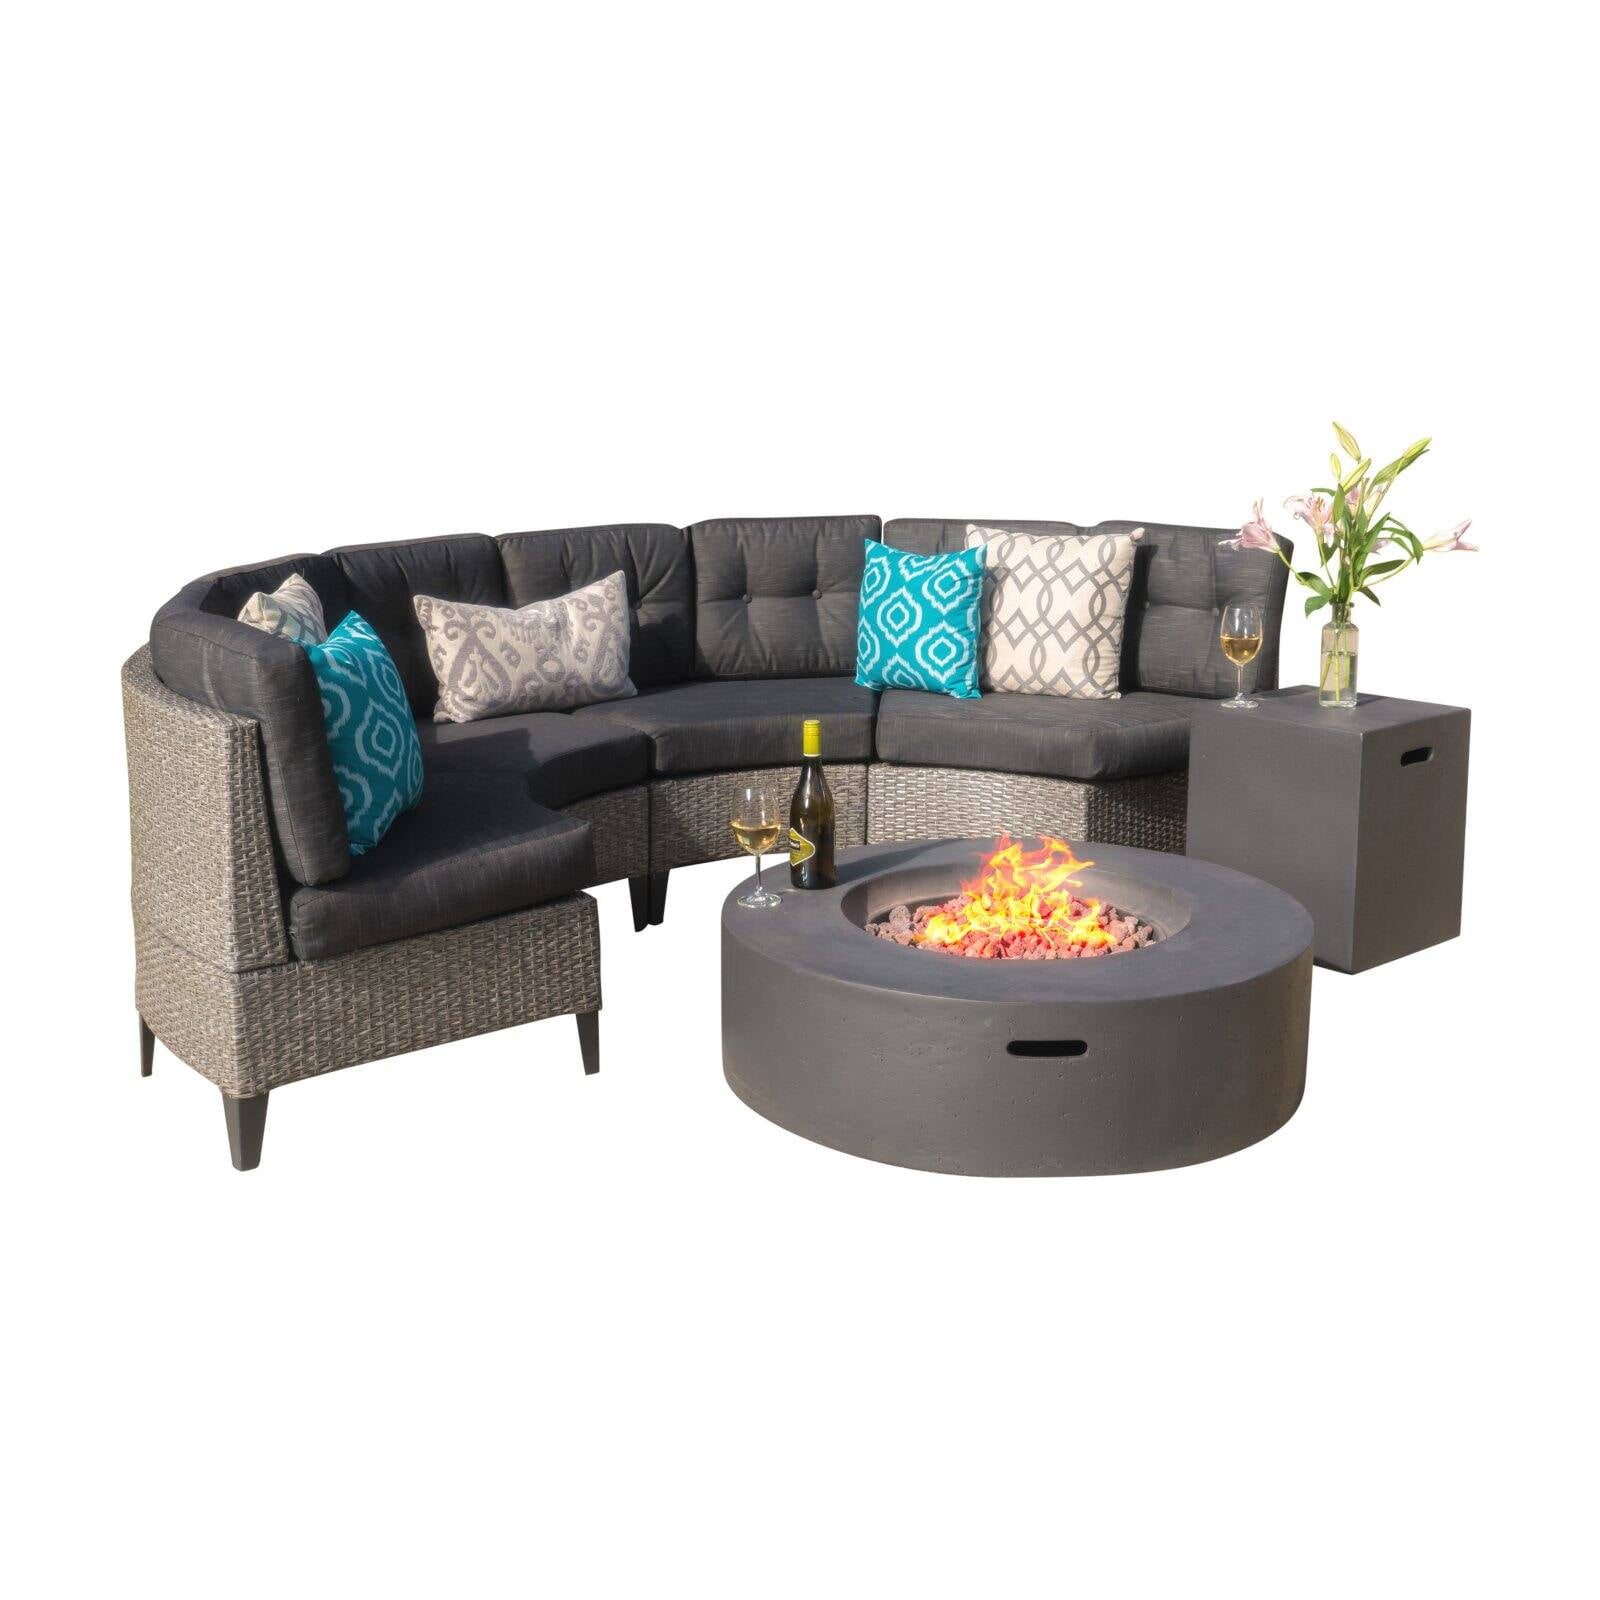 Home Navagio Wicker 6 Piece Half Round, Outdoor Sectional Furniture With Fire Pit